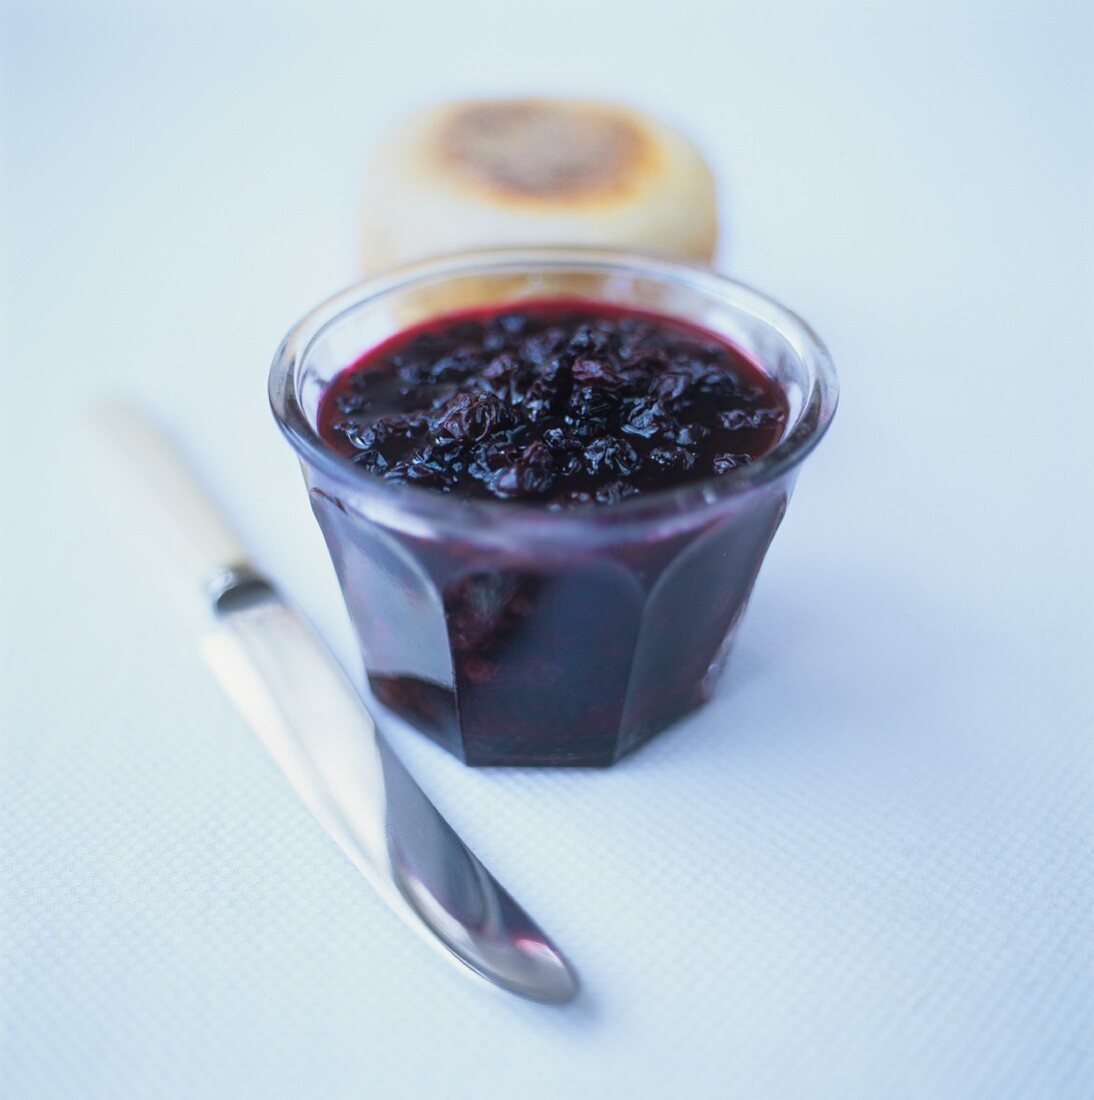 Blueberry and cassis preserve